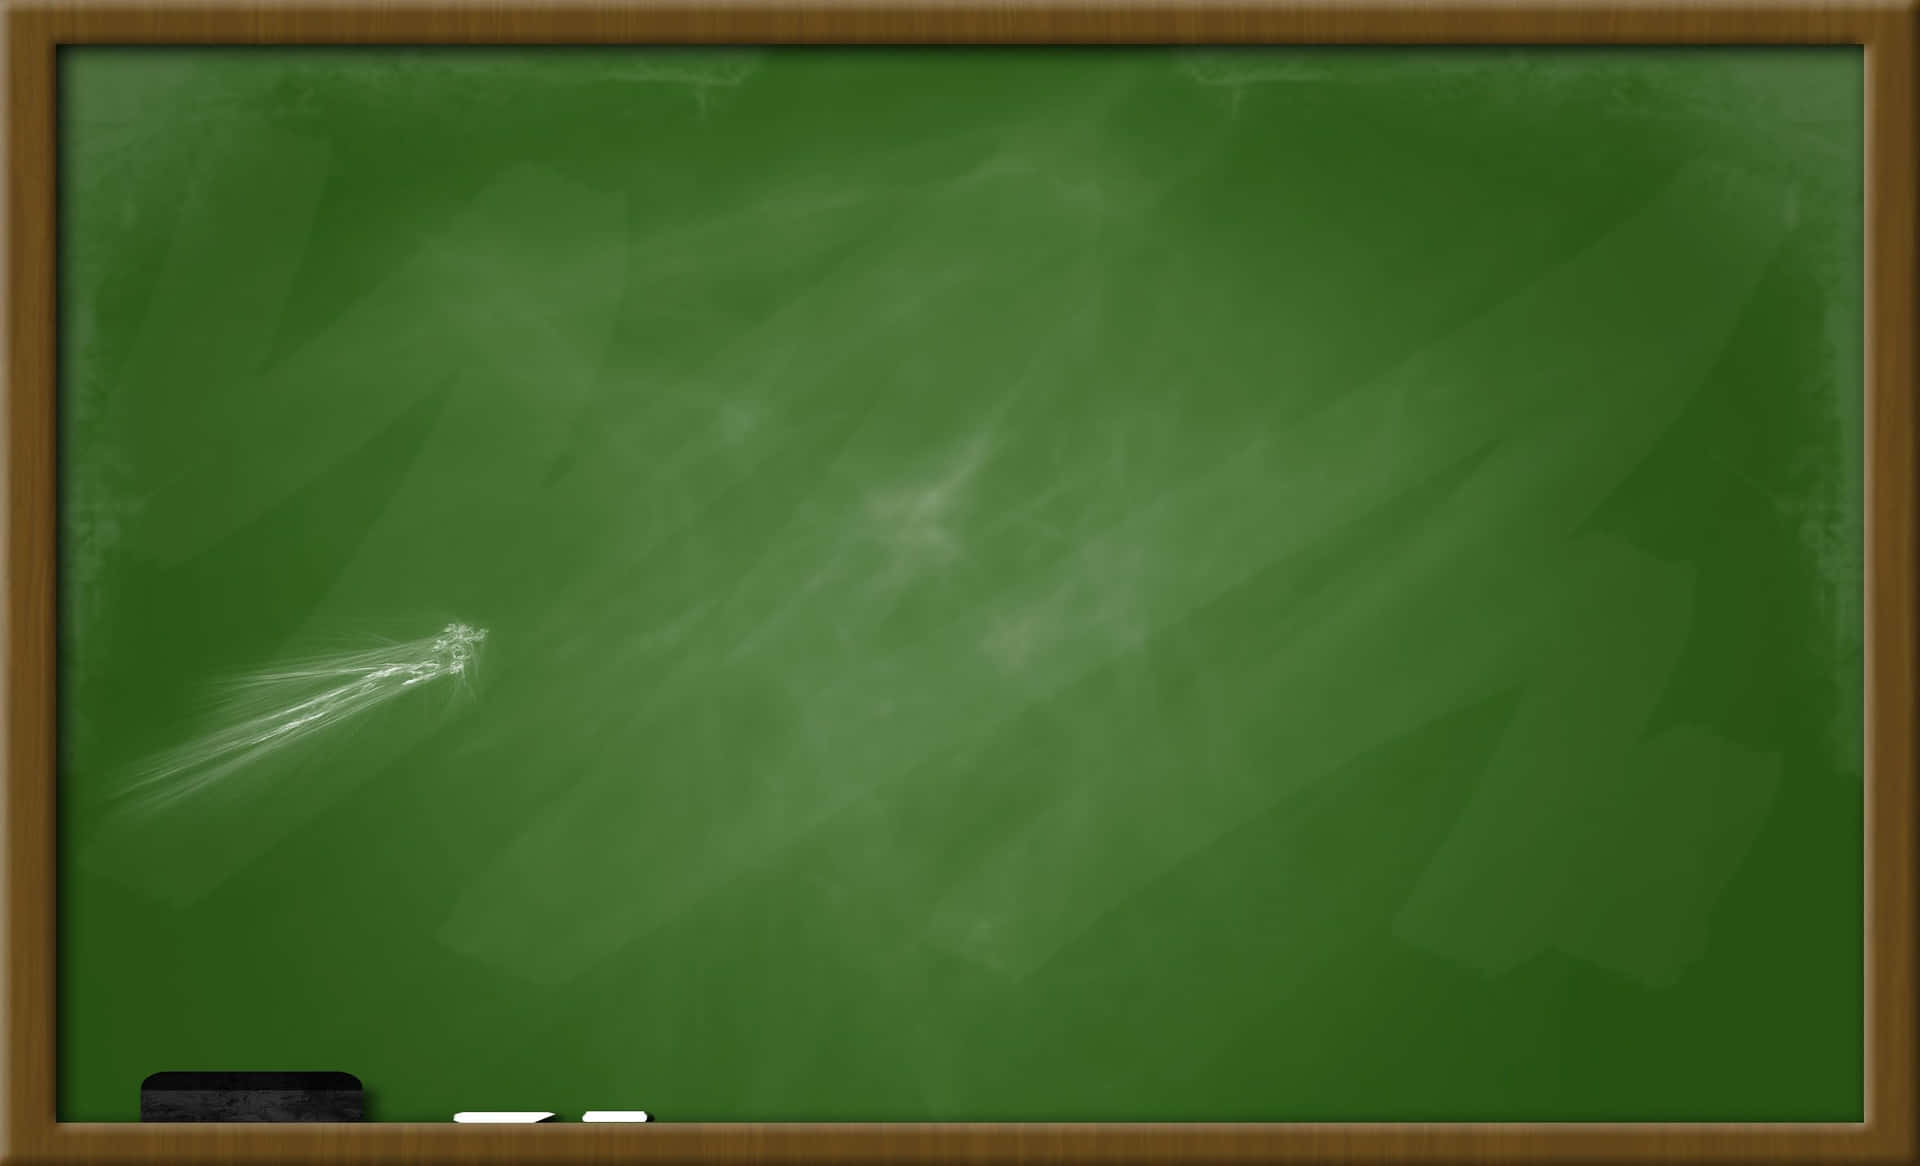 A Blackboard With A Chalkboard And A Pencil